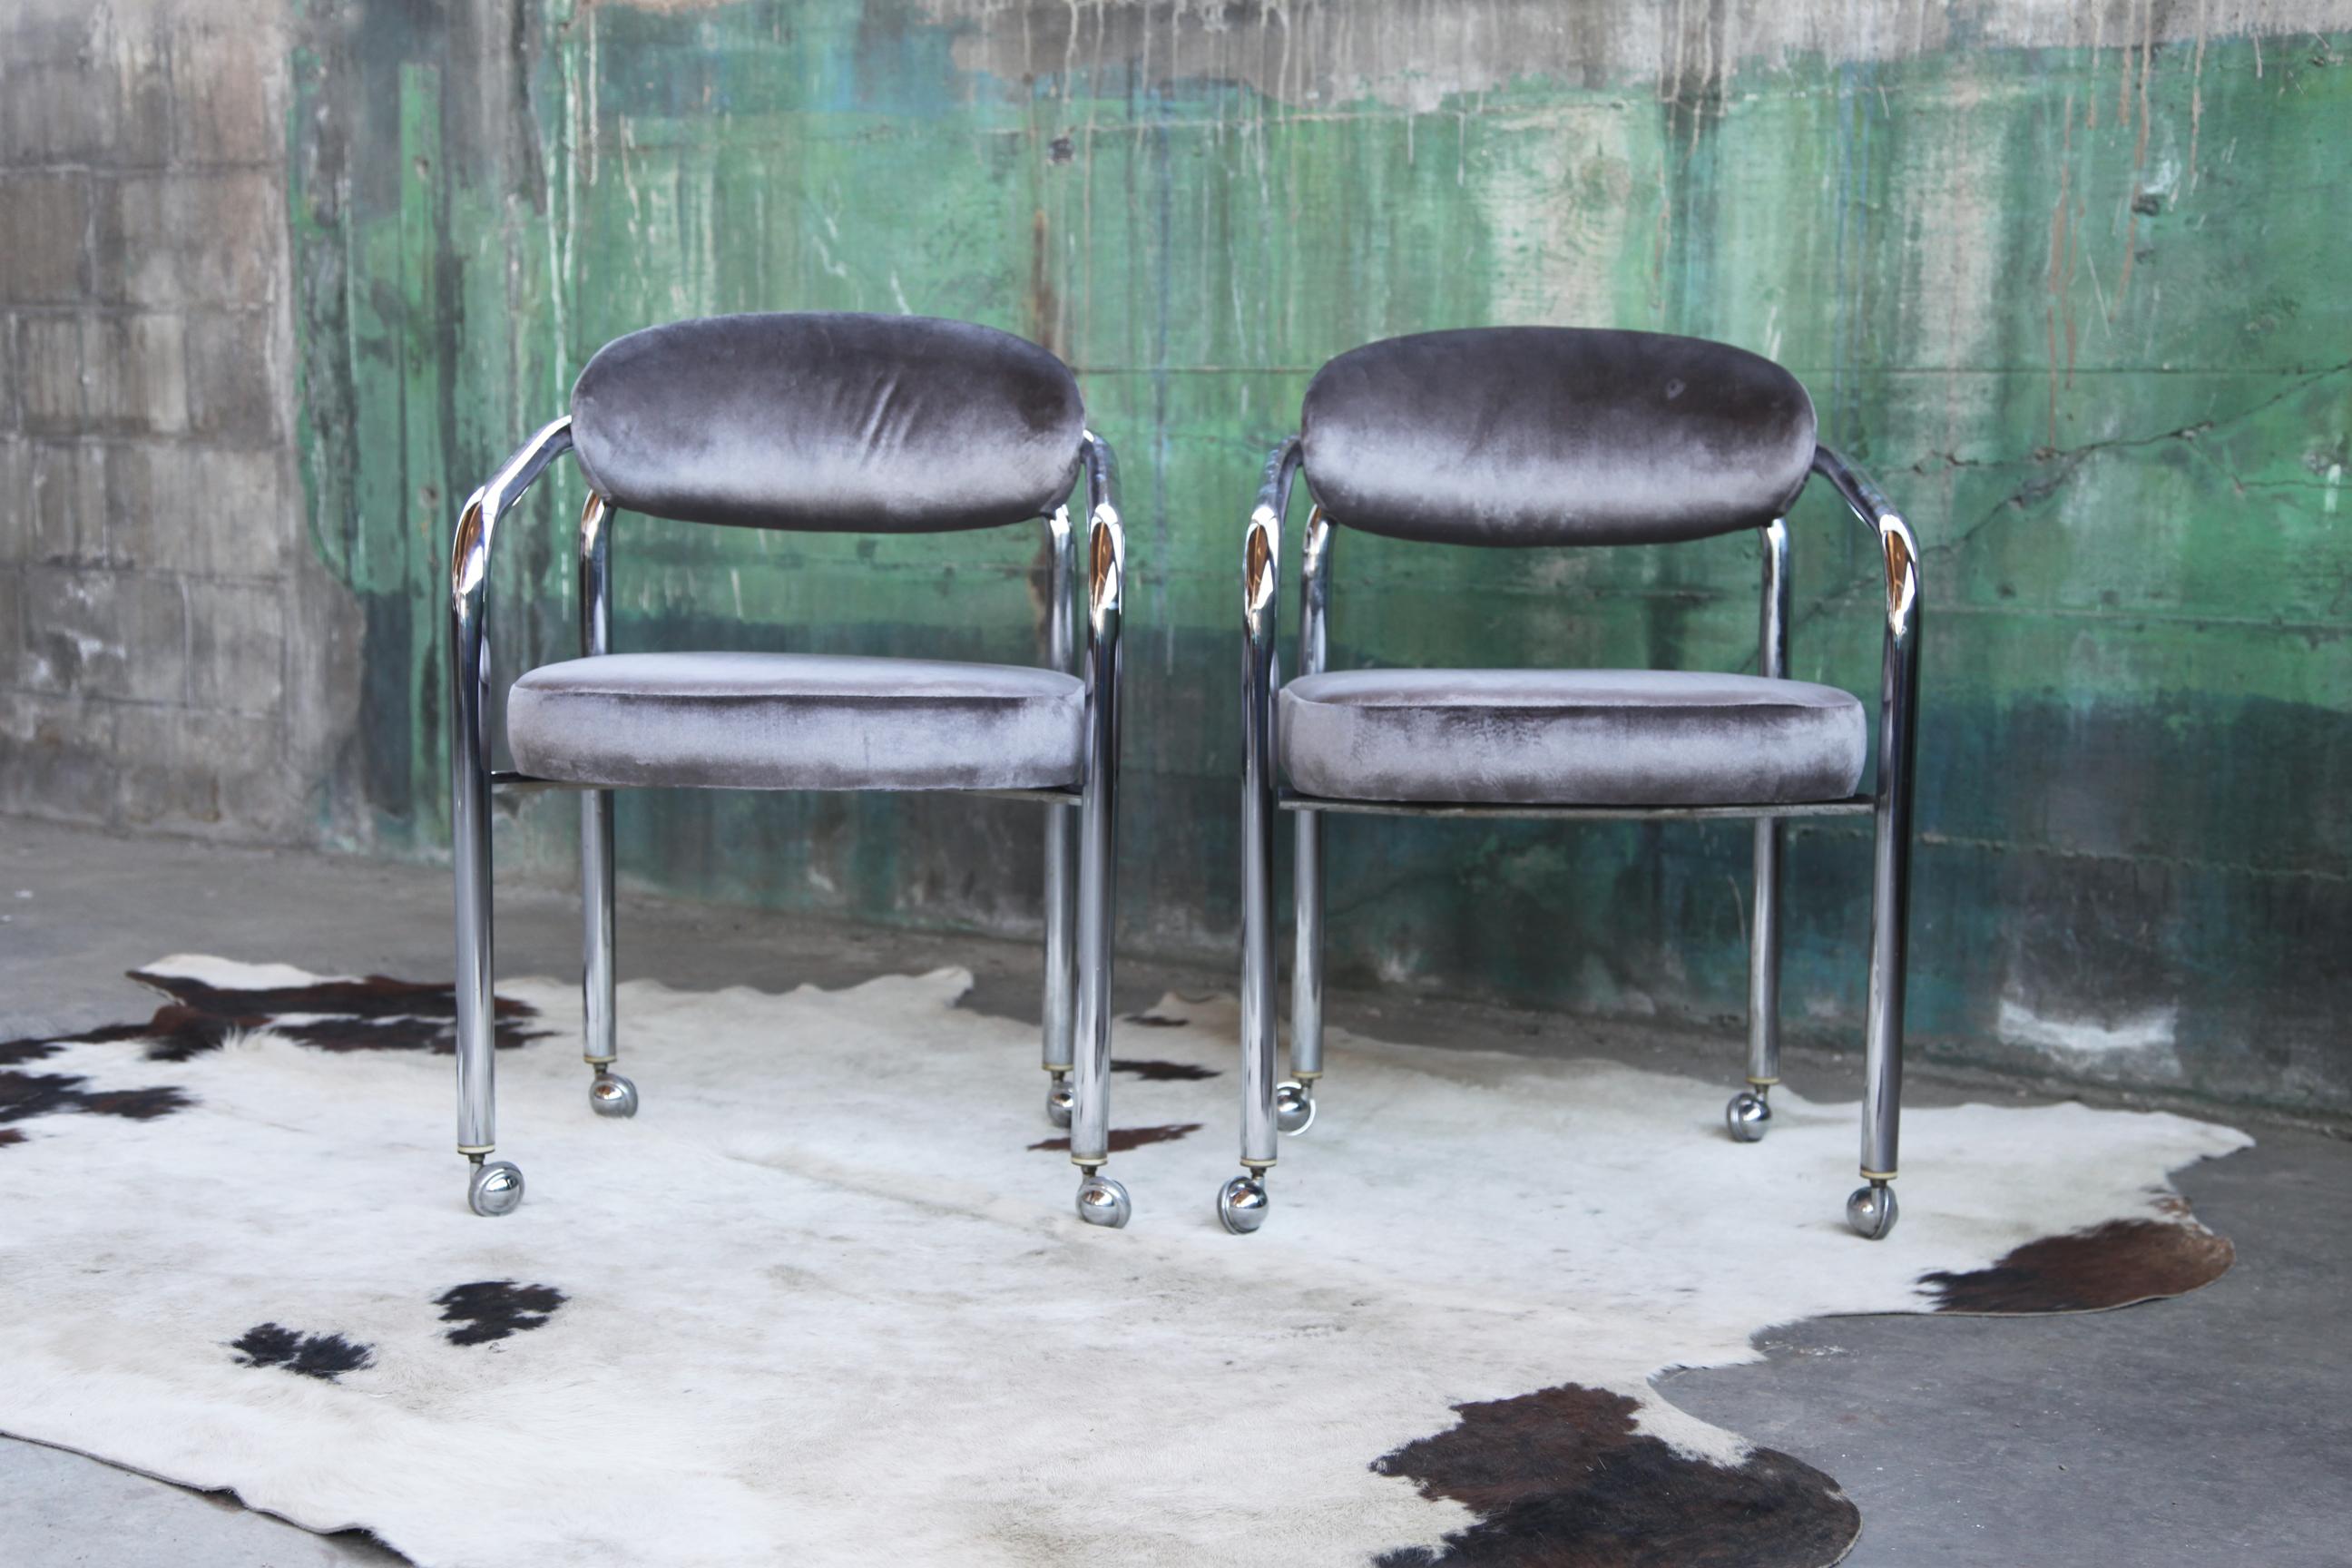 Incredible tubular chrome 1970s chairs on very gorgeous chrome, ball casters / wheels. Very clean condition on the frame. Brand new upholstery, in stunning condition. In the style of John Mascheroni. Very gorgeous bent chrome design. 

Just